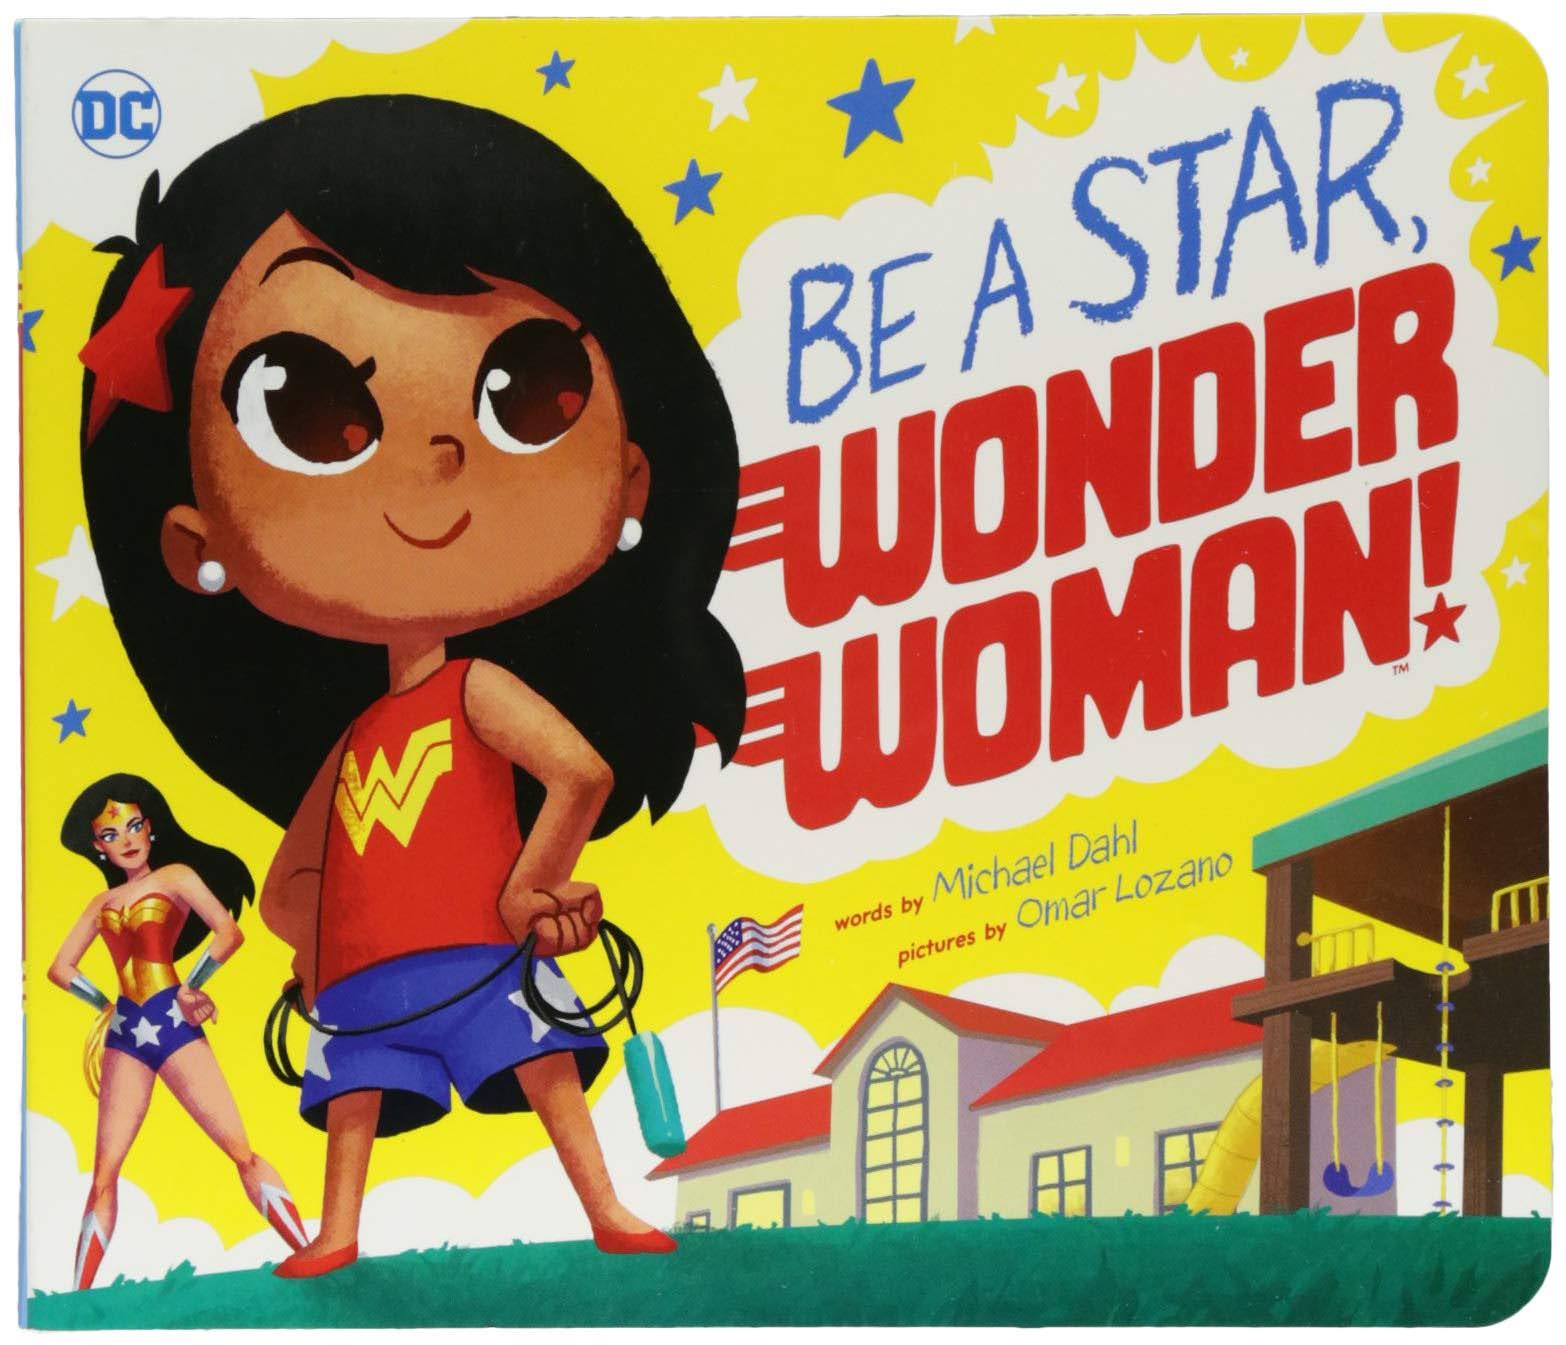 Be A Star, Wonder Woman! by Michael Dahl and illustrated by Omar Lozano